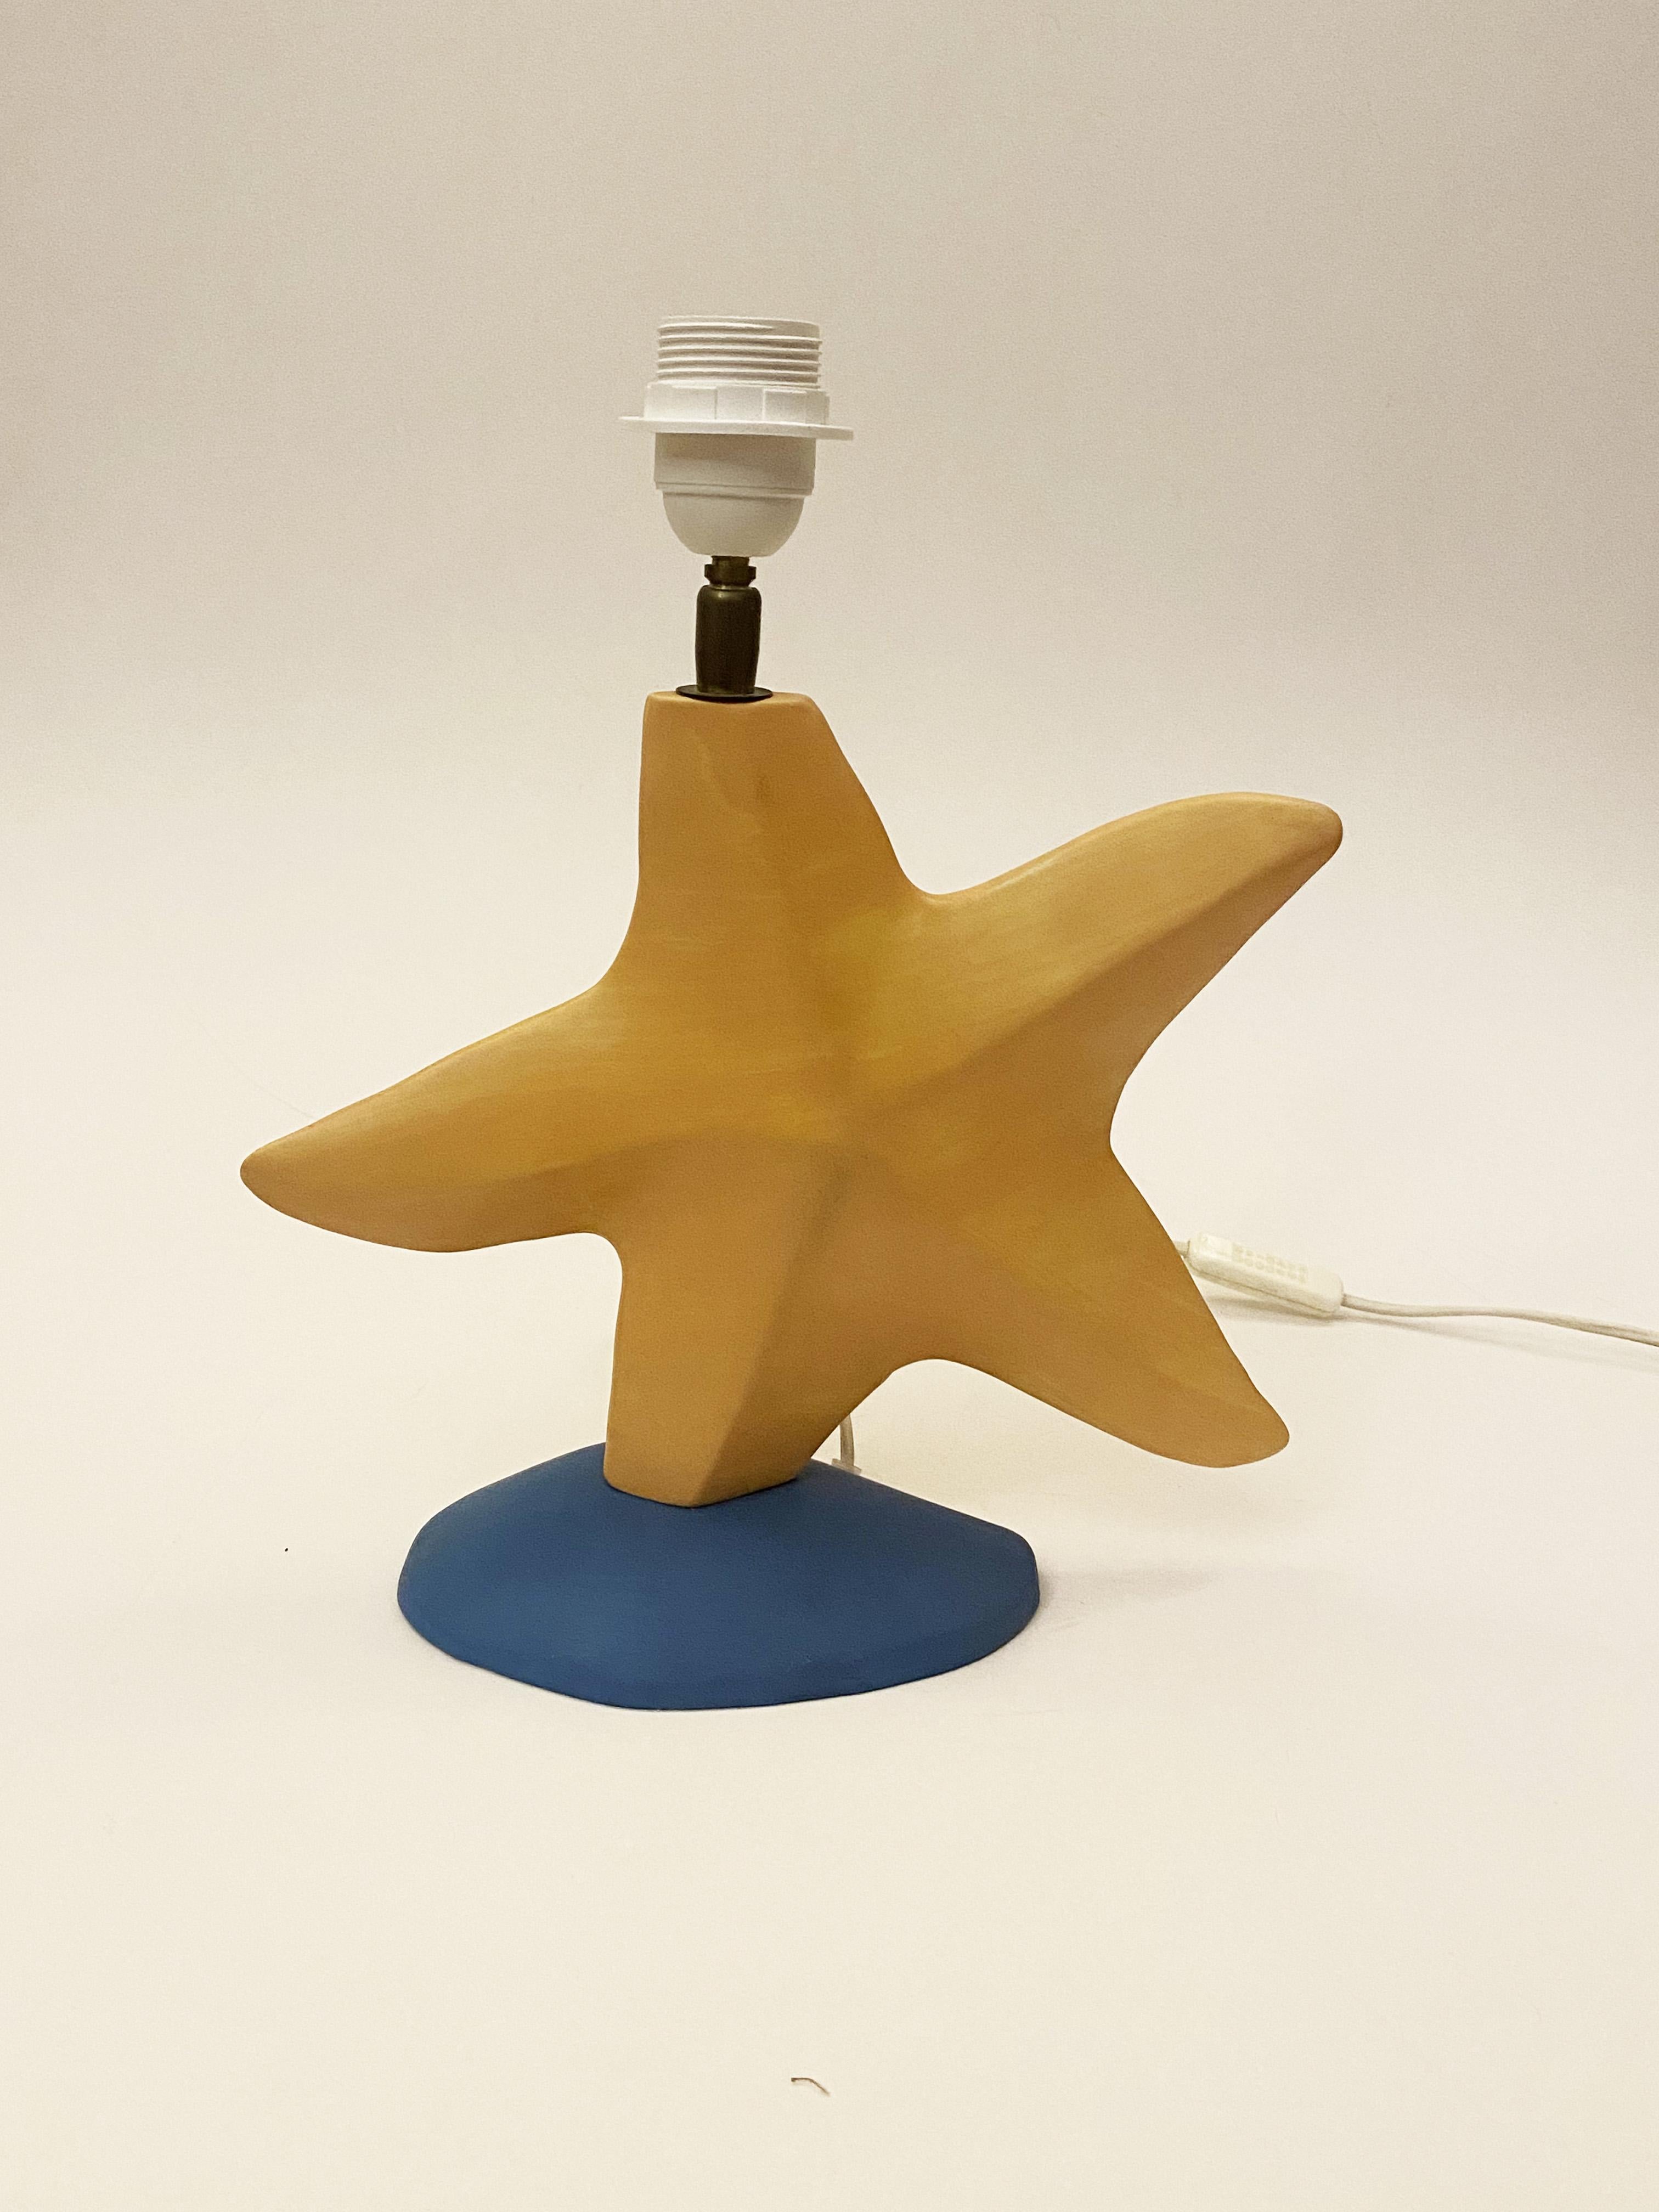 French Postmodern Star Ceramic Lamp by François Chatain, 1980s
Very good condition.
34 cm height without the lampshade, 44 cm height with the lampshade.